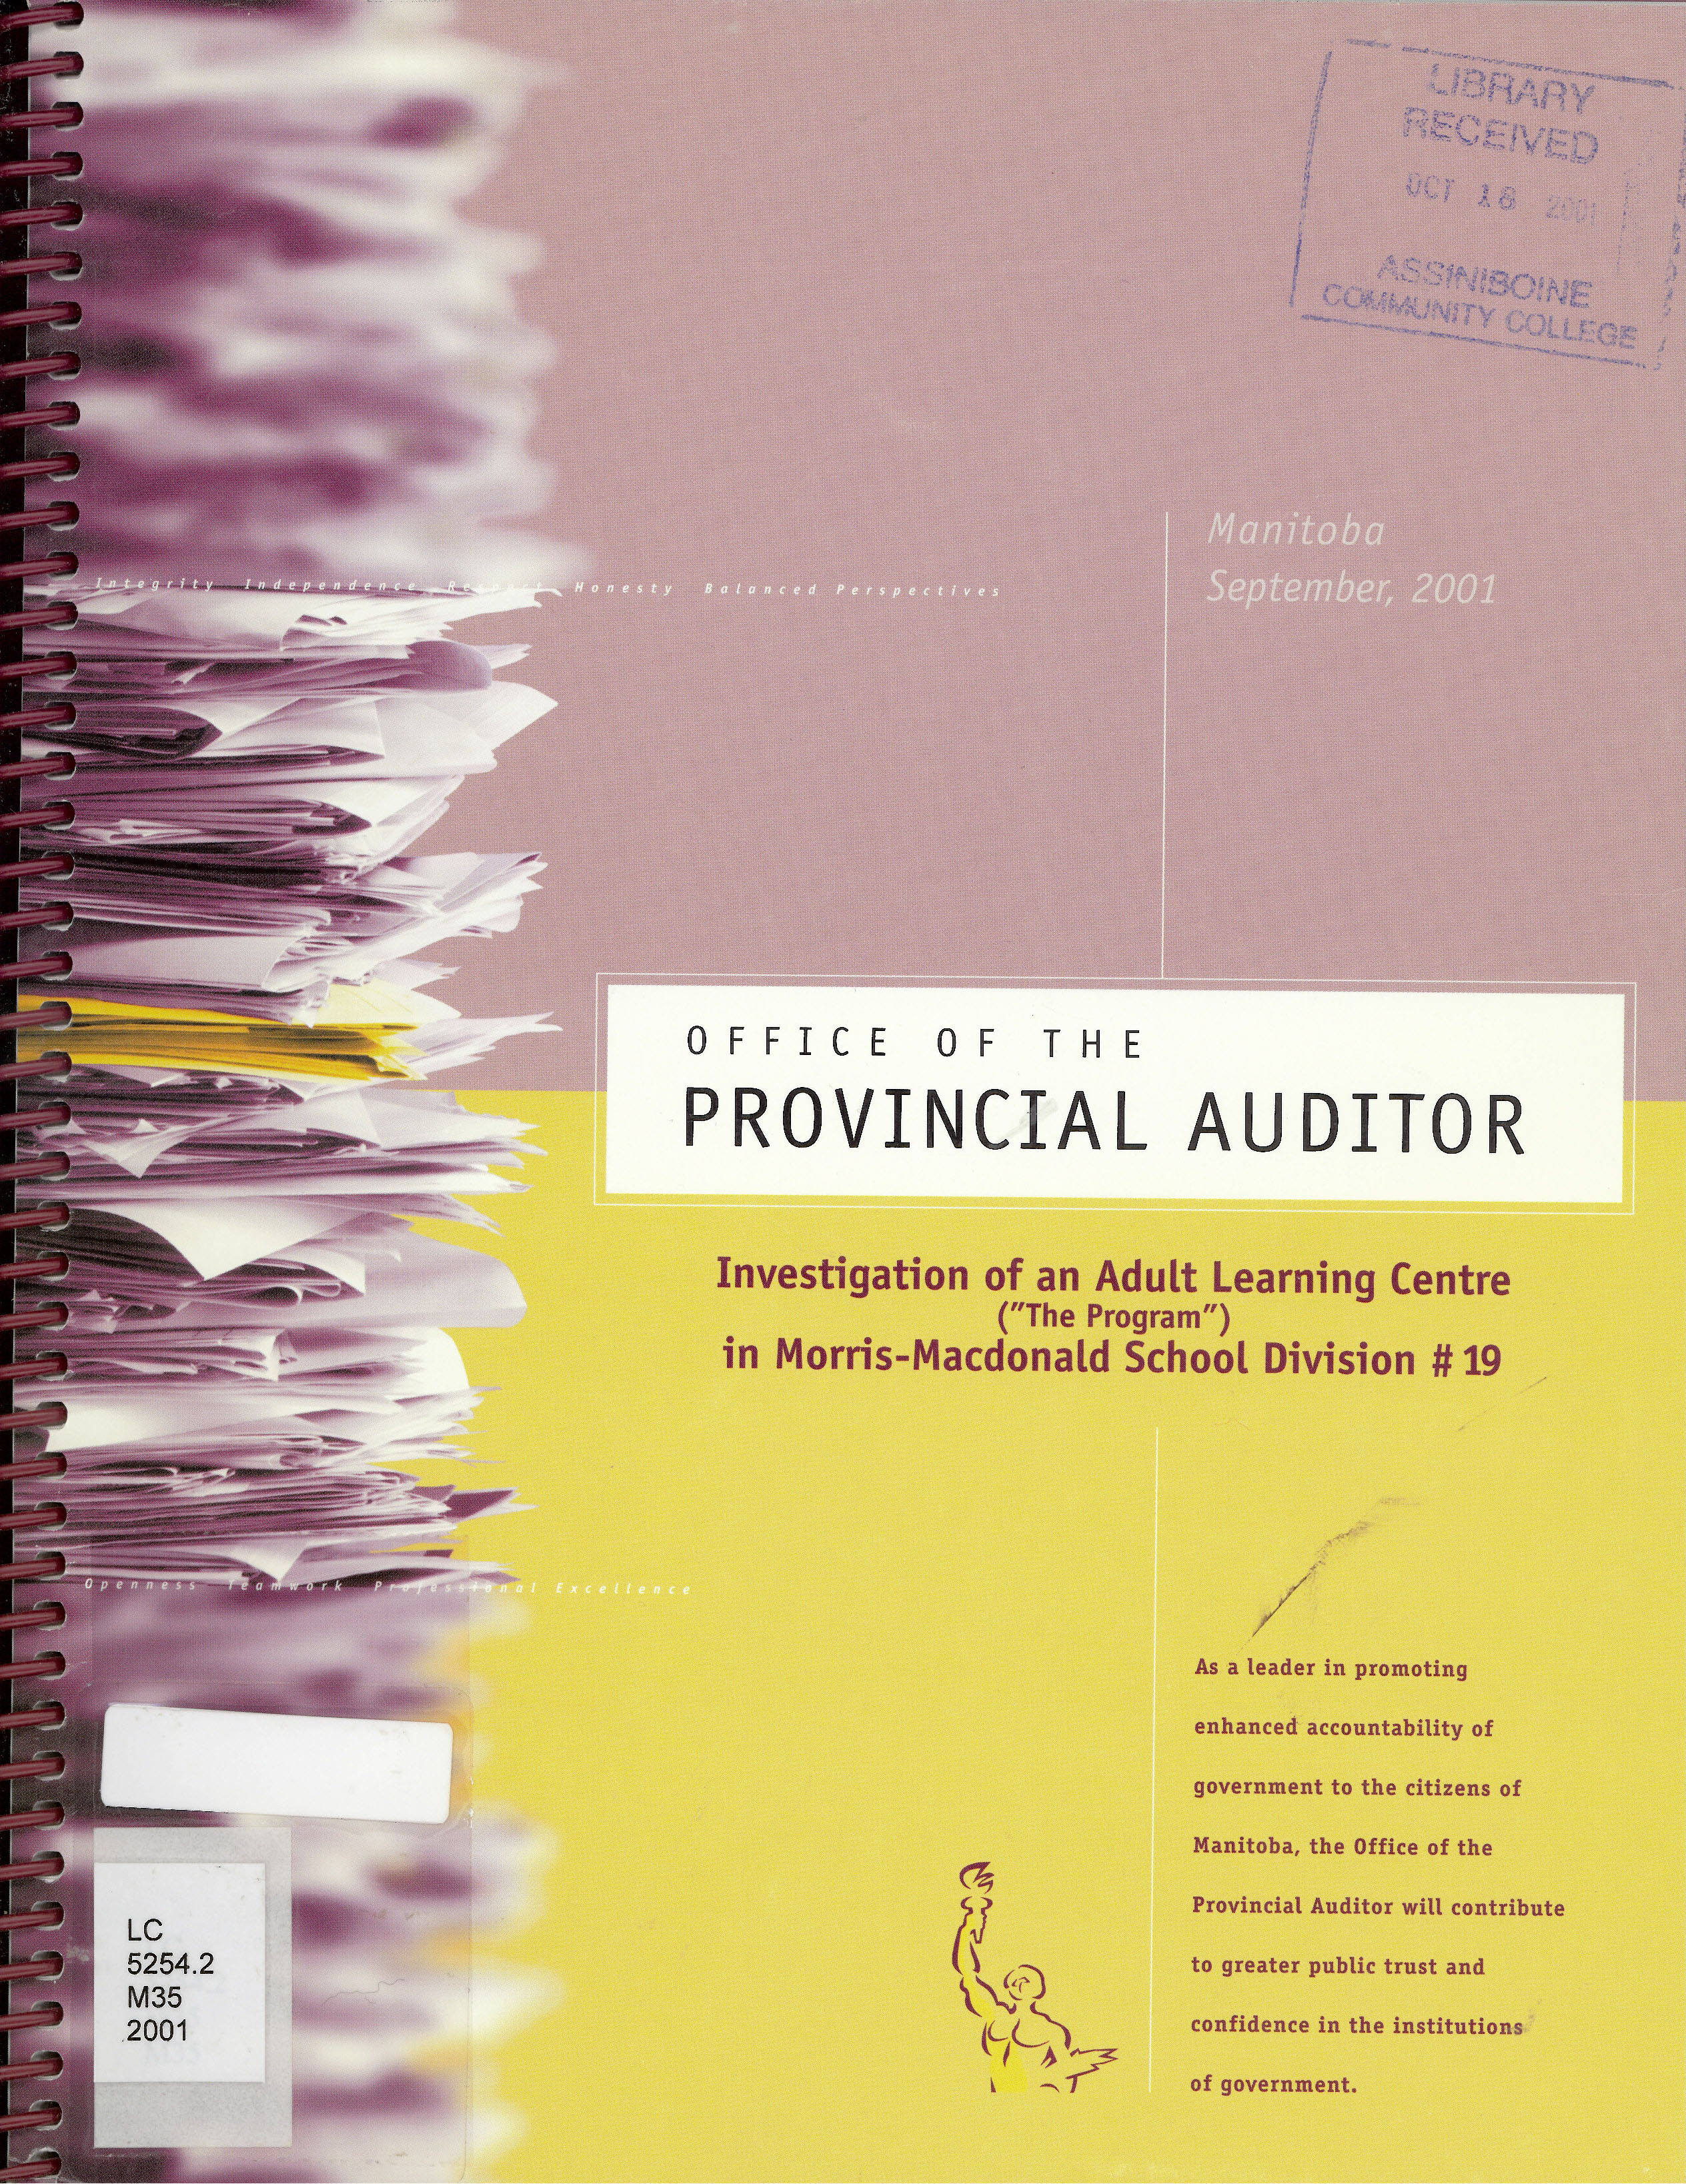 Investigation of an adult learning centre ("The Program") in Morris-MacDonald School Division # 19